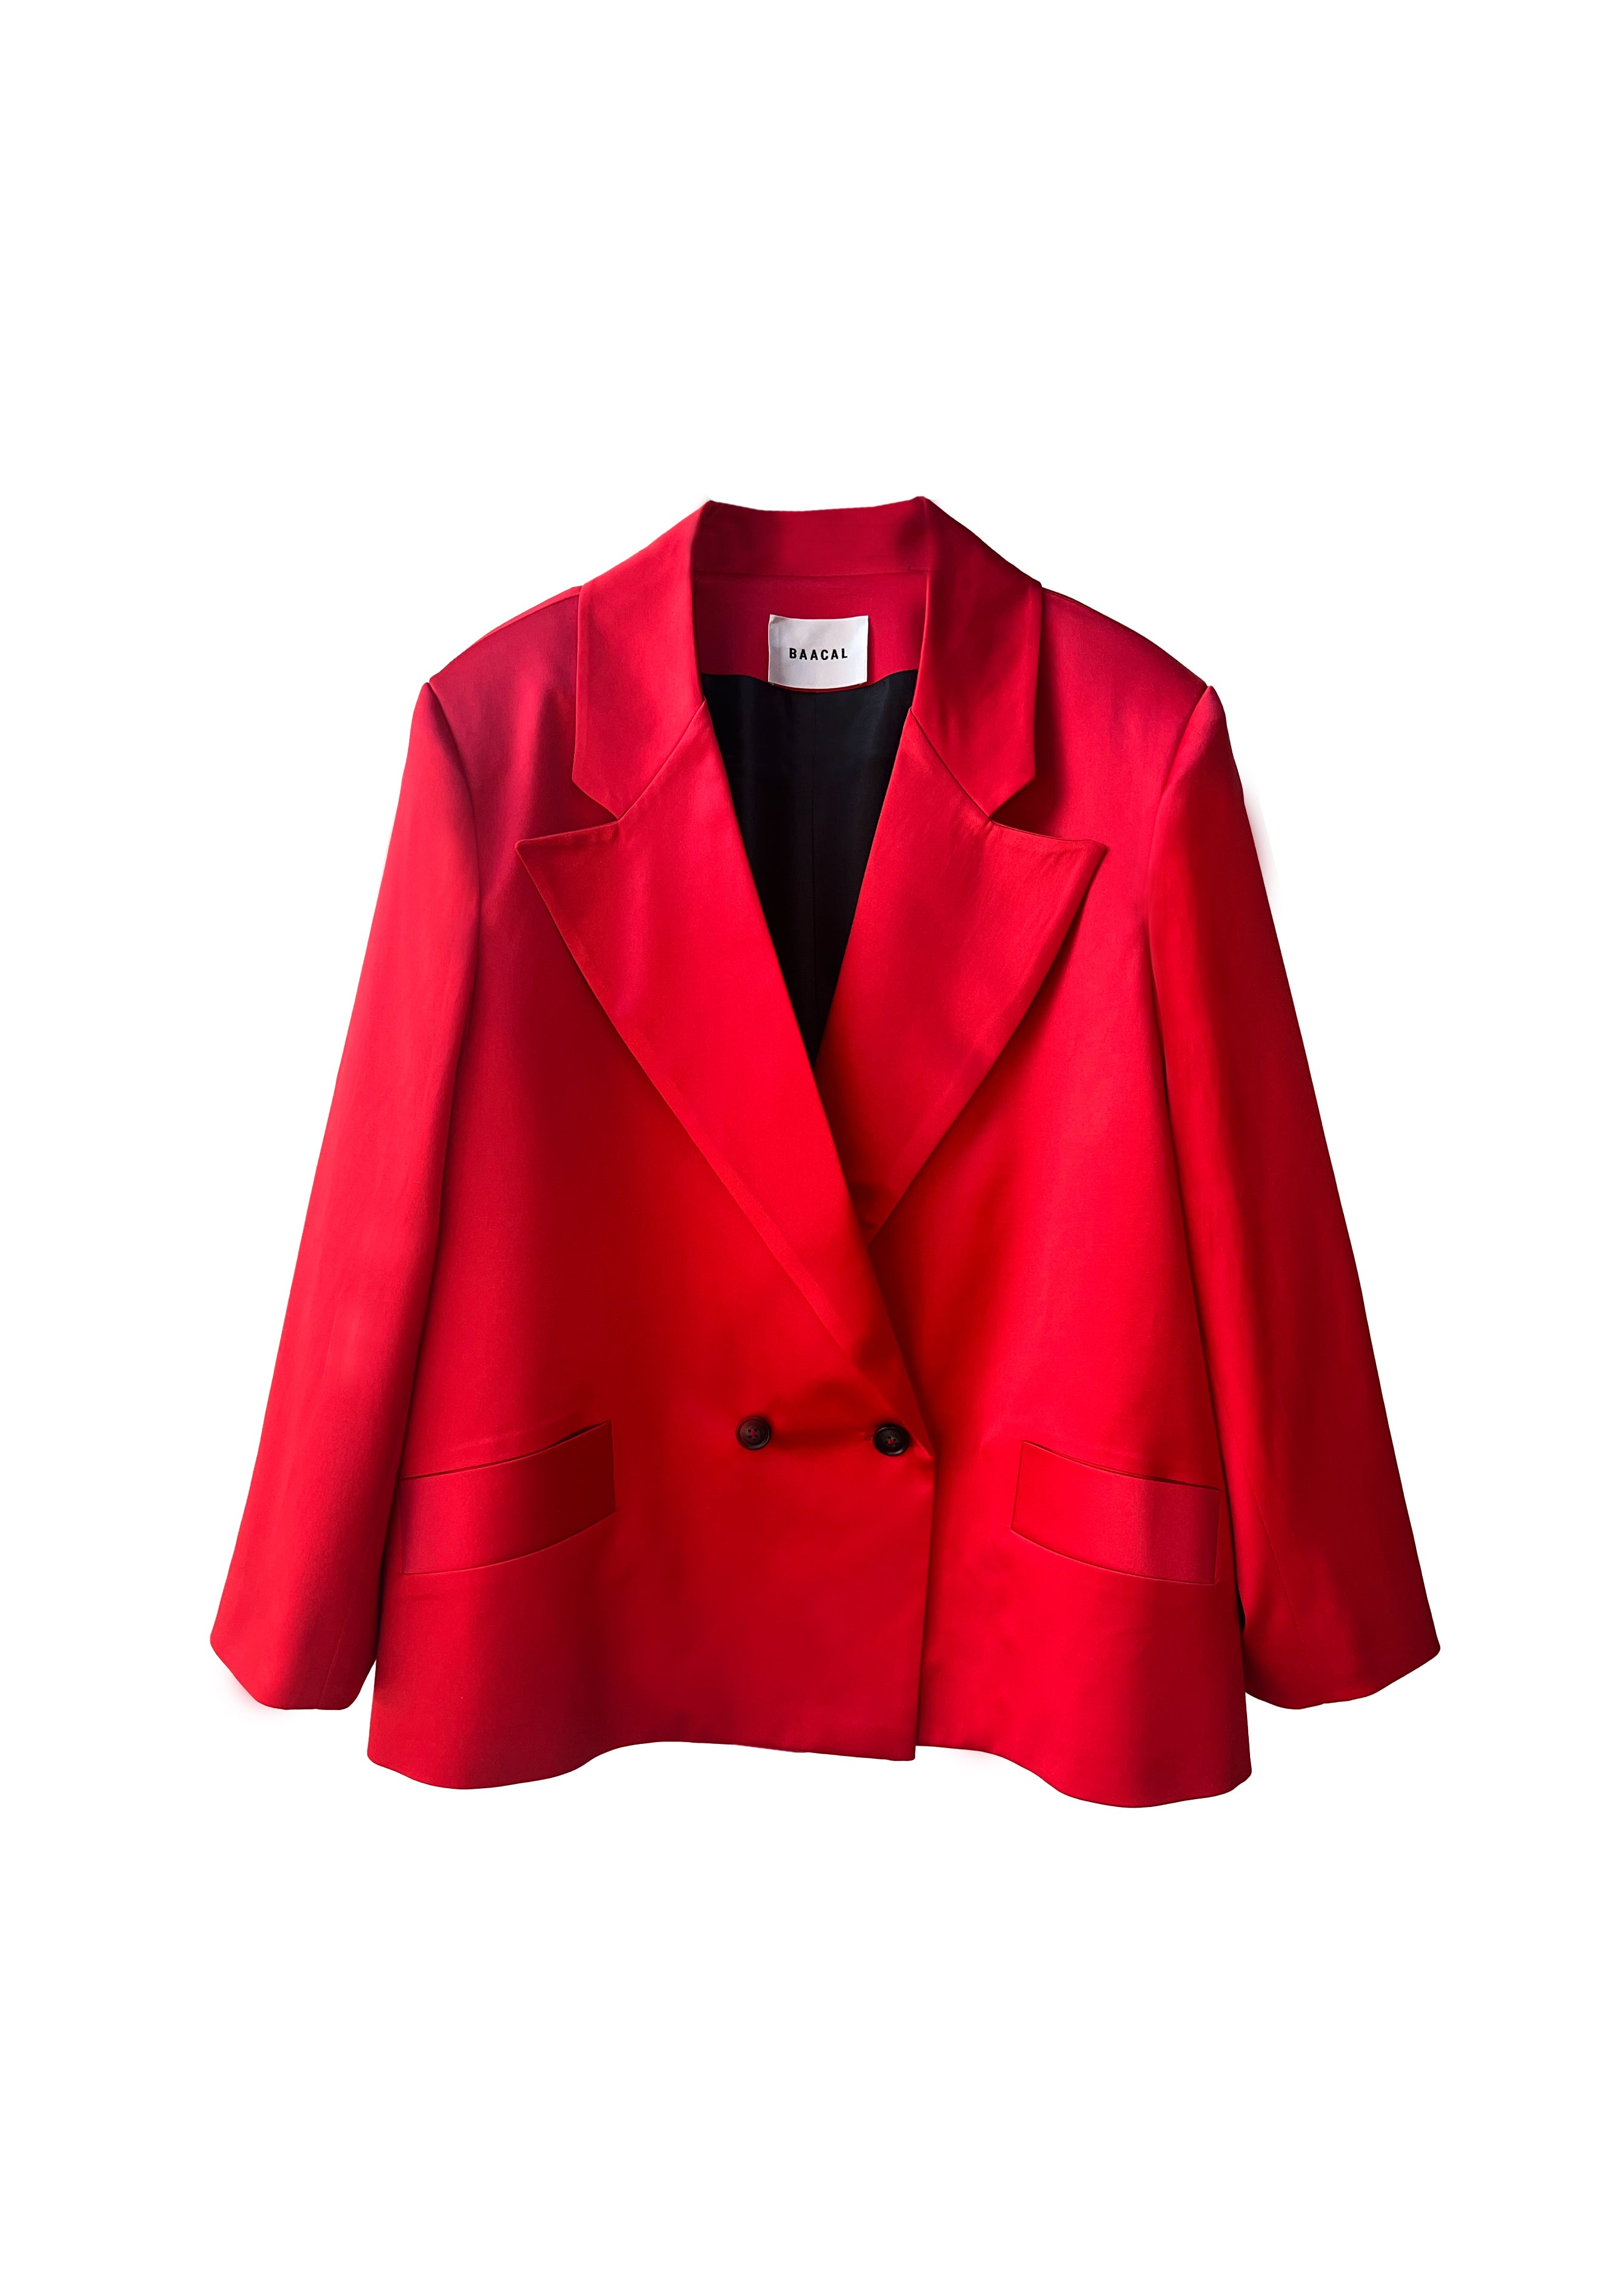 flat of red Lexi jacket